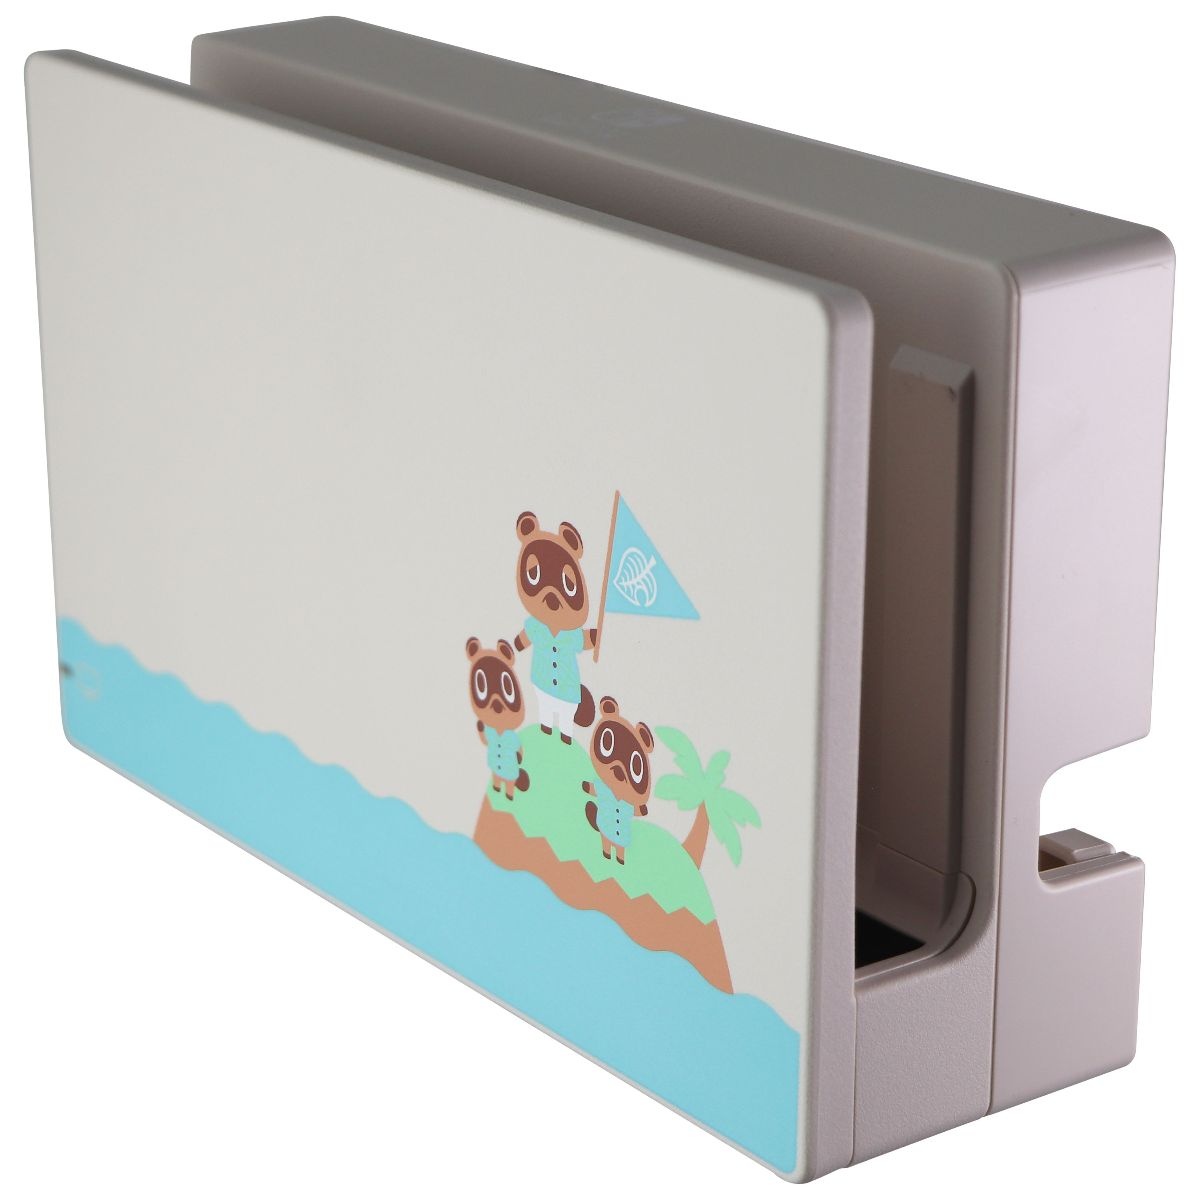 Pre-Owned Nintendo Switch Dock - Animal Crossing: New Horizons Edition (HAC-007) Dock Only (Refurbished: Good) - image 1 of 5